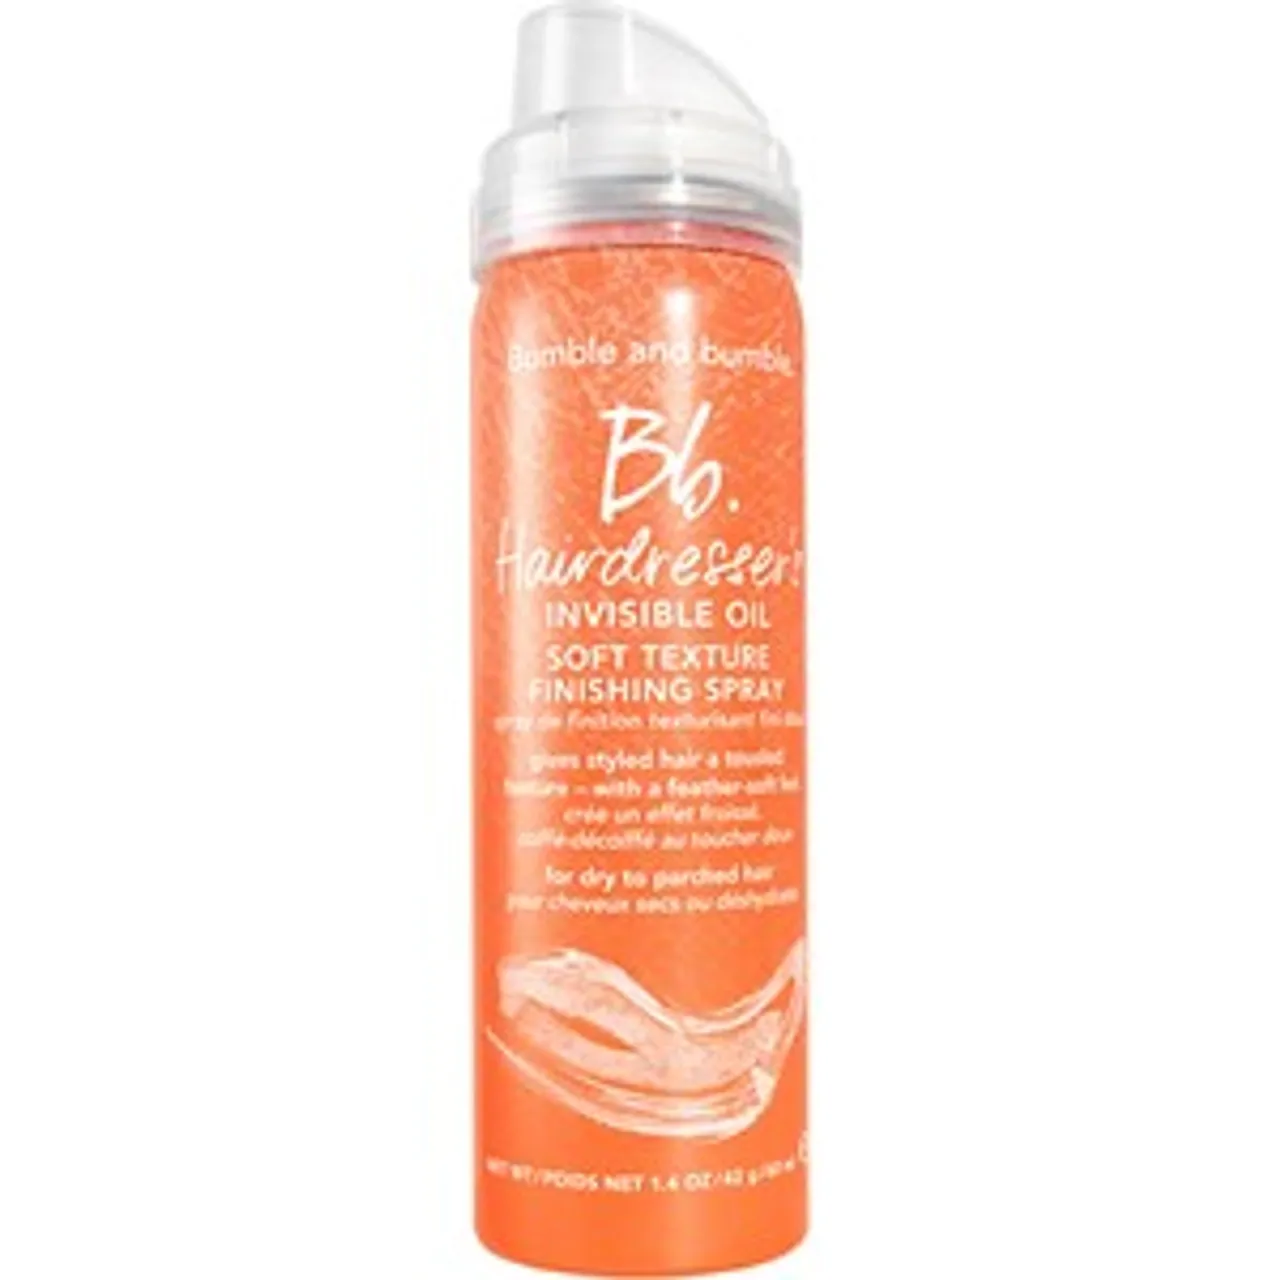 Bumble and bumble HIO Soft Texture Finishing Spray Female 150 ml